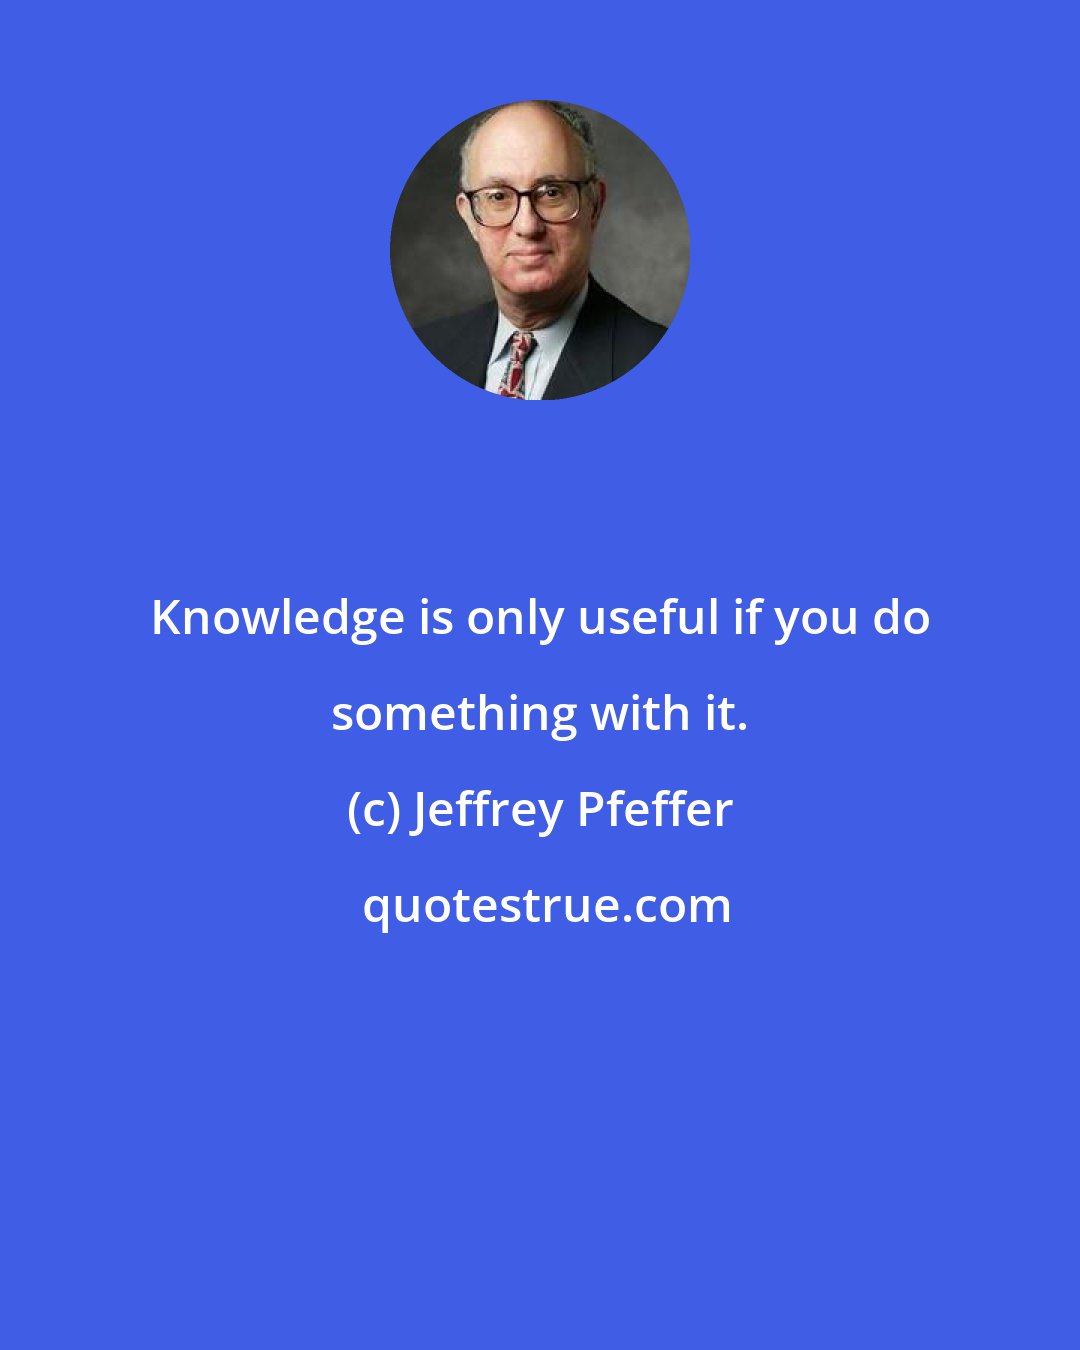 Jeffrey Pfeffer: Knowledge is only useful if you do something with it.